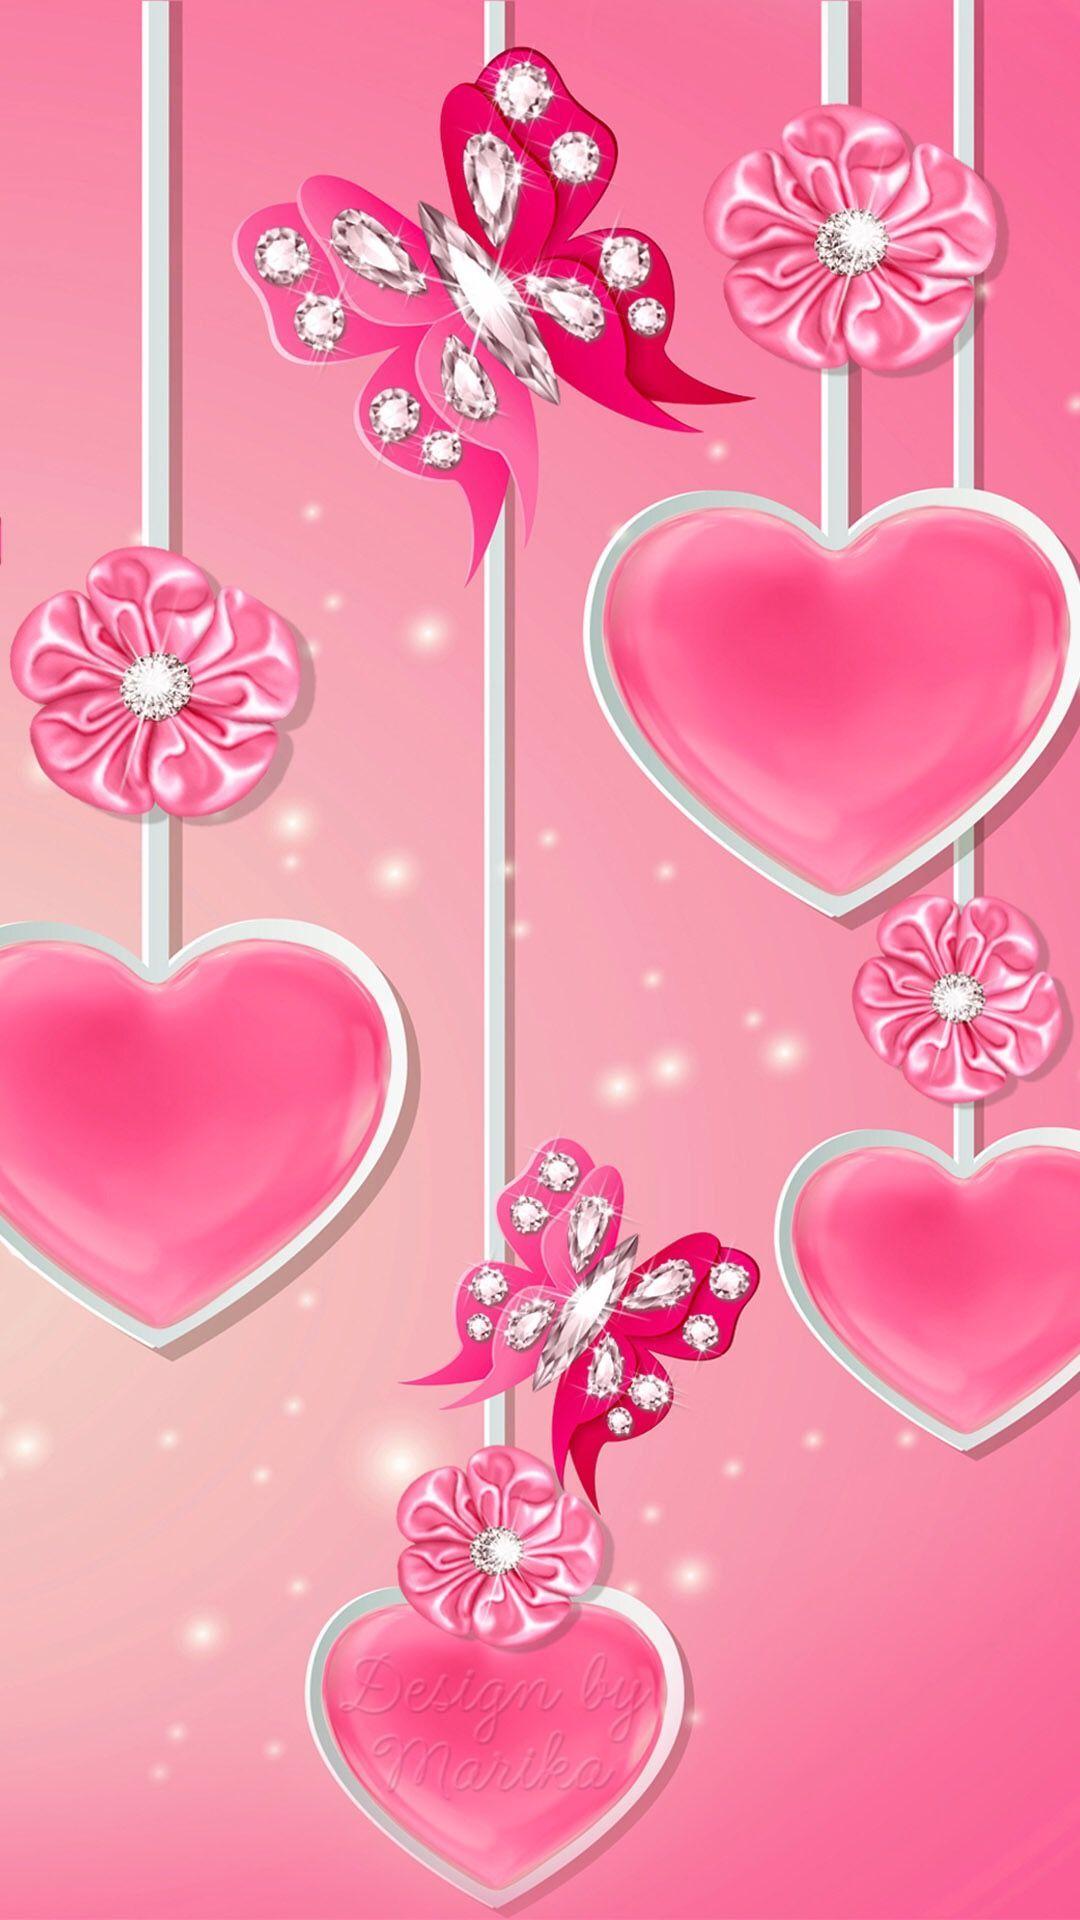 Hearts And Flowers Wallpapers For Mobile - Wallpaper Cave